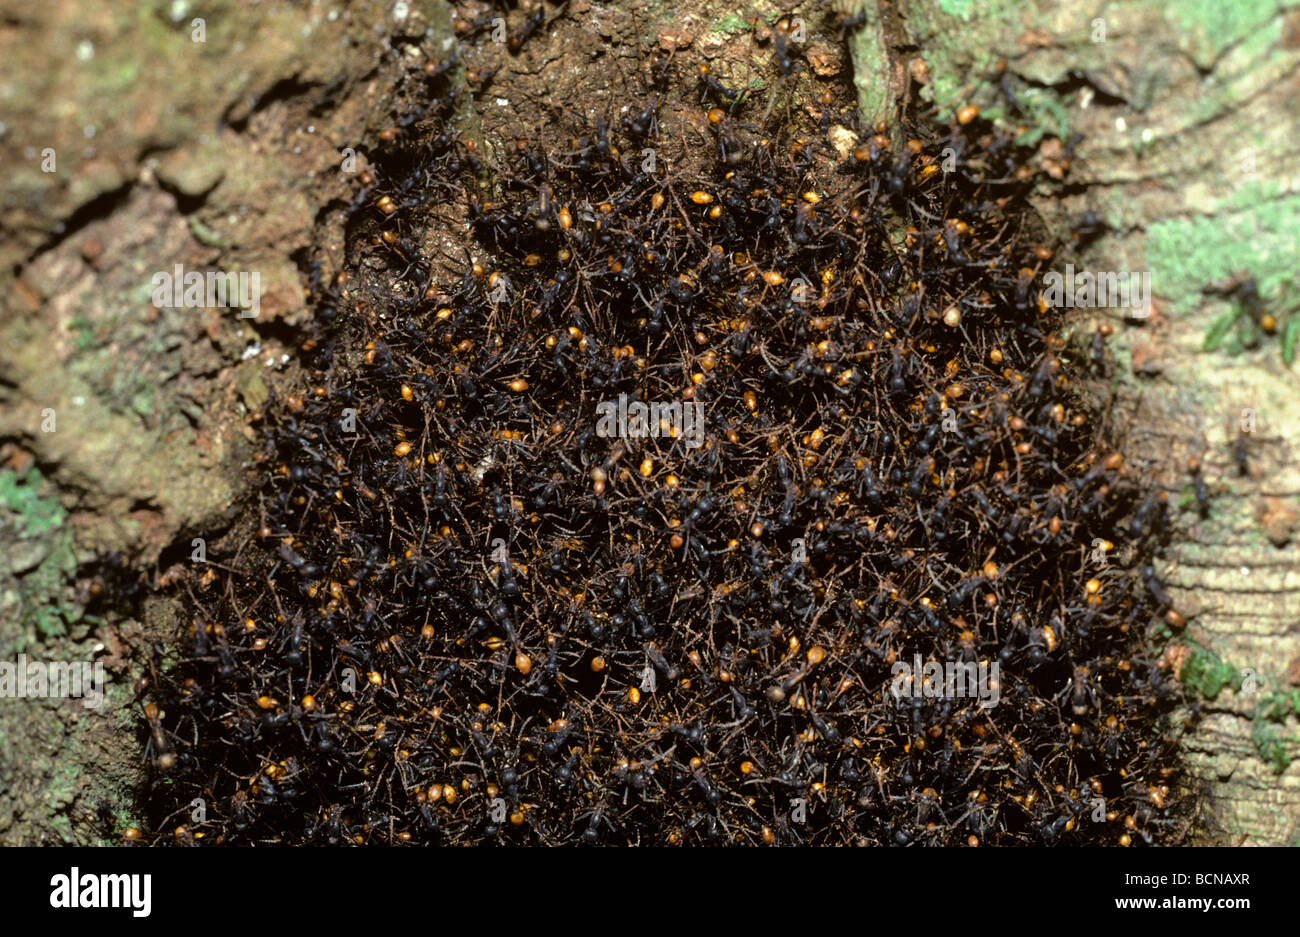 Army ants Eciton burchelli Formicidae part of a bivouac under the roots of a tree in rainforest Trinidad Stock Photo